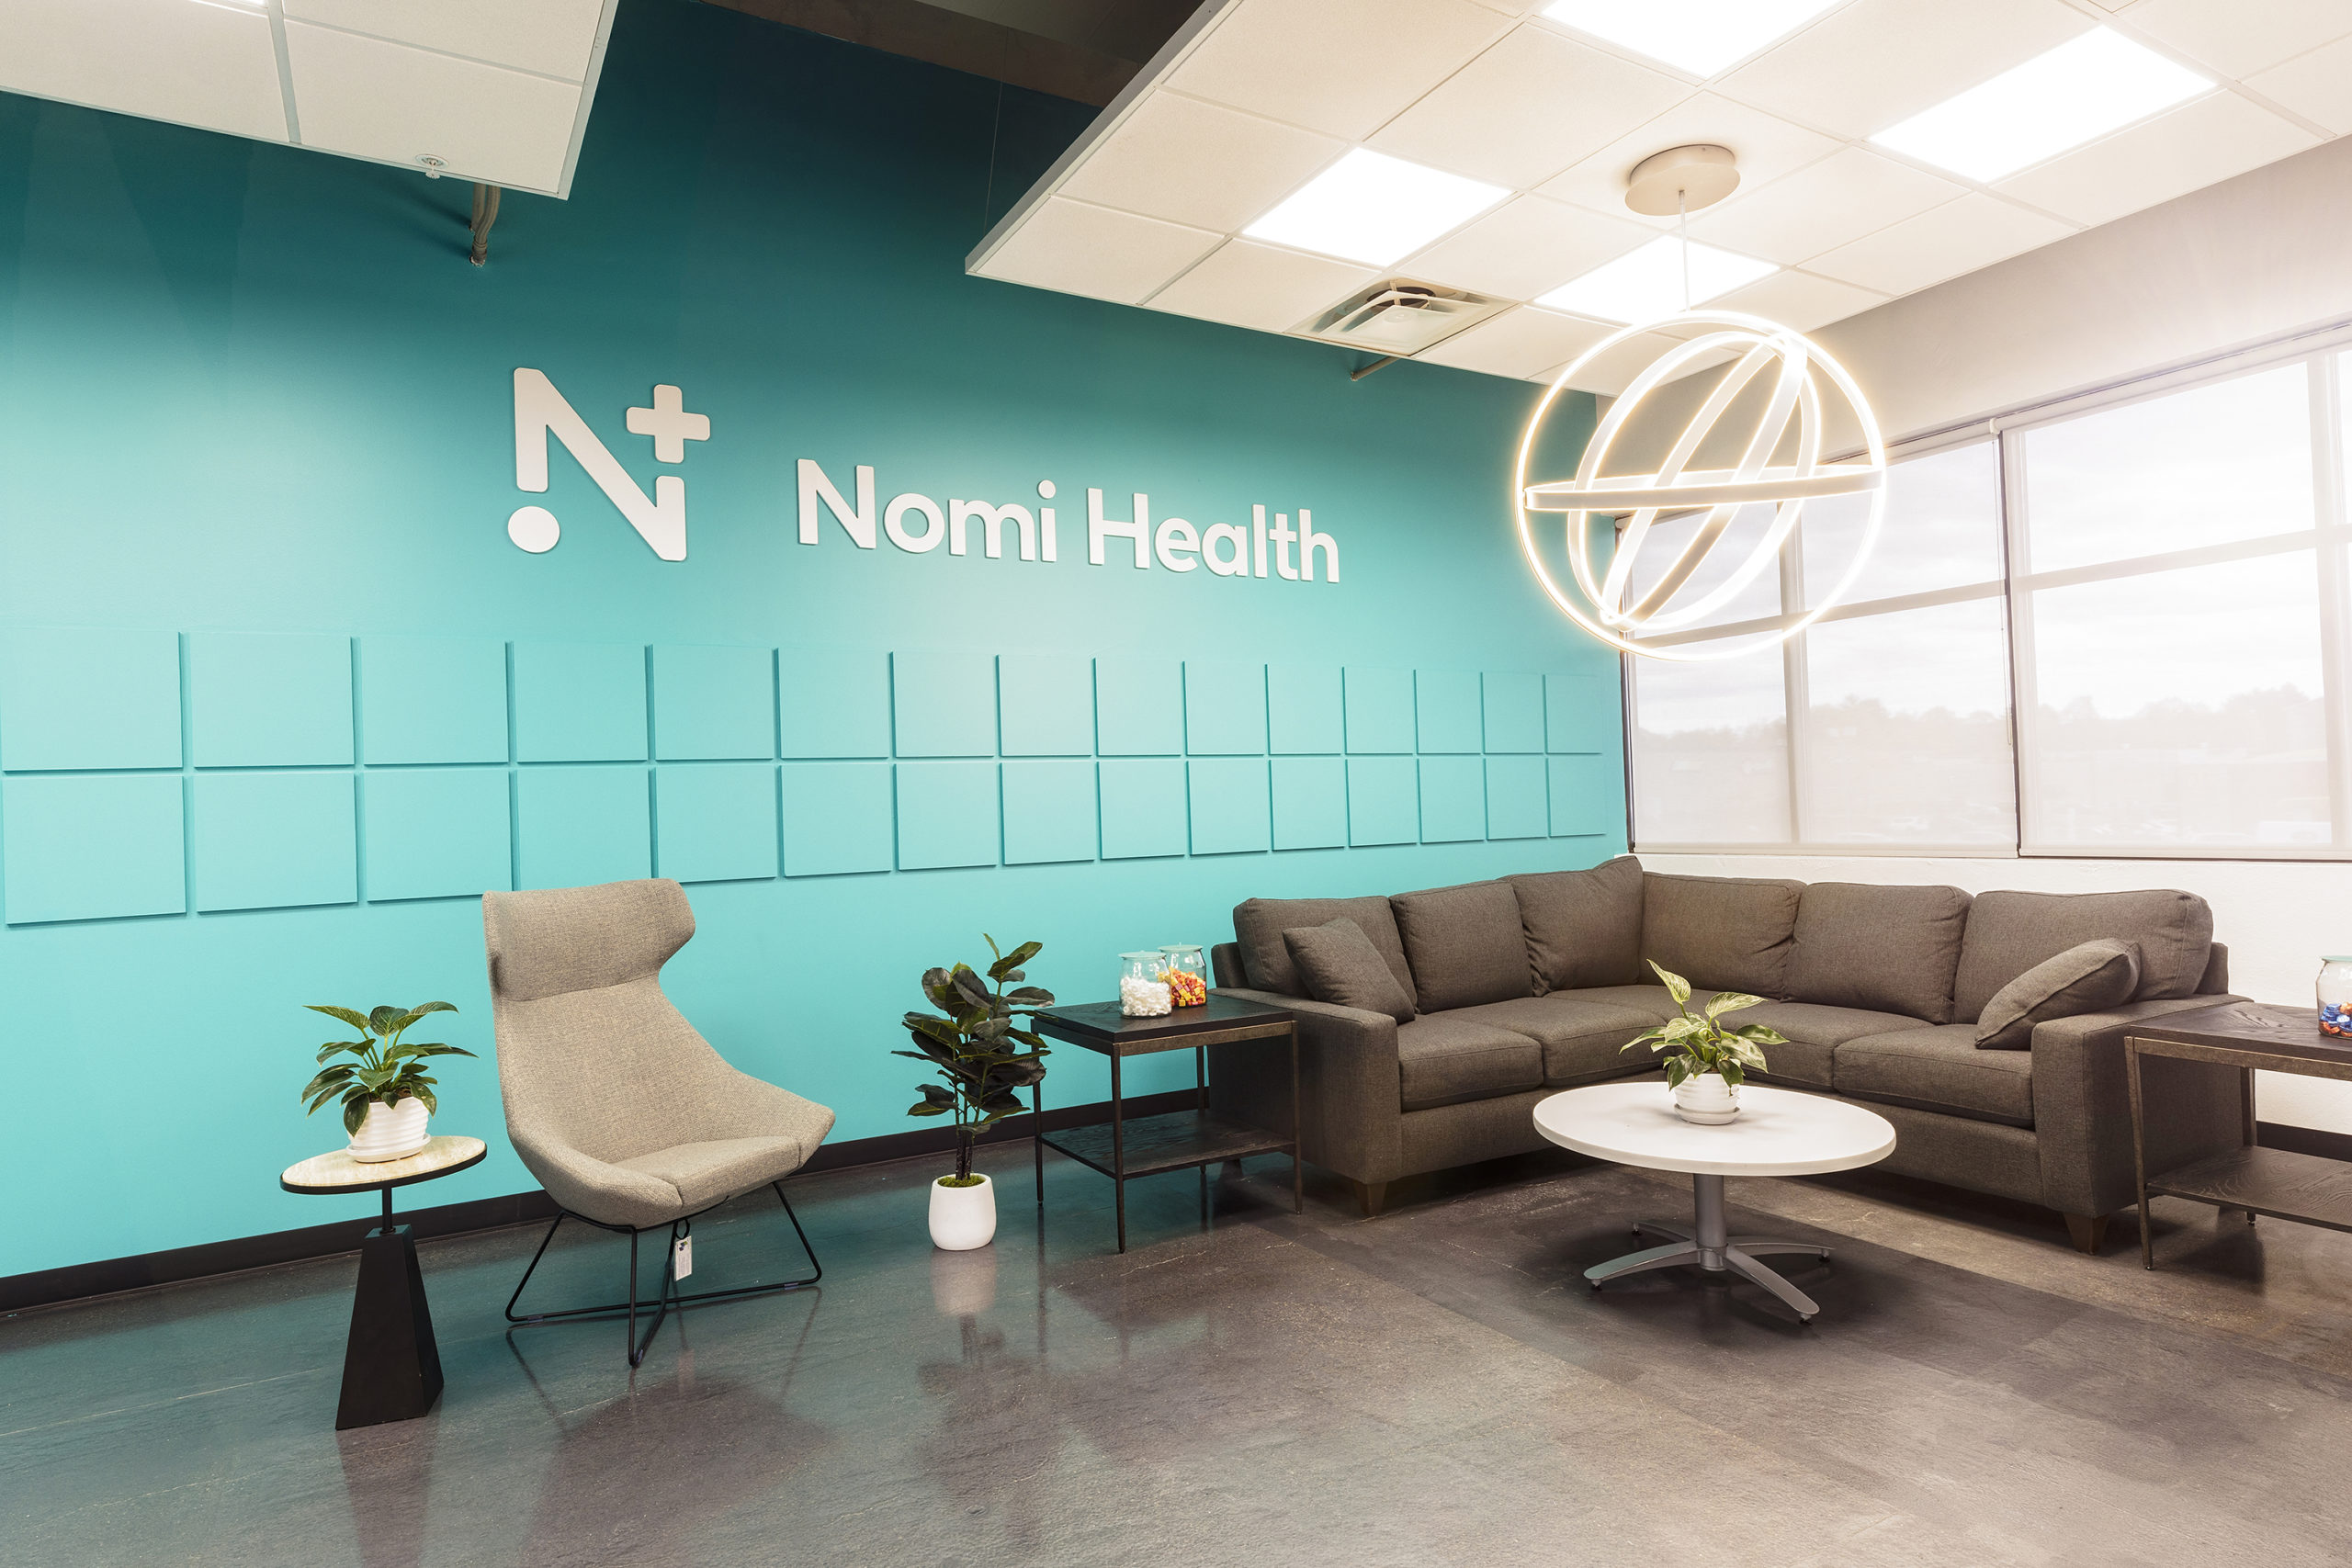 Nomi thinks companies should pay healthcare bills directly and cut out expensive health insurance costs.